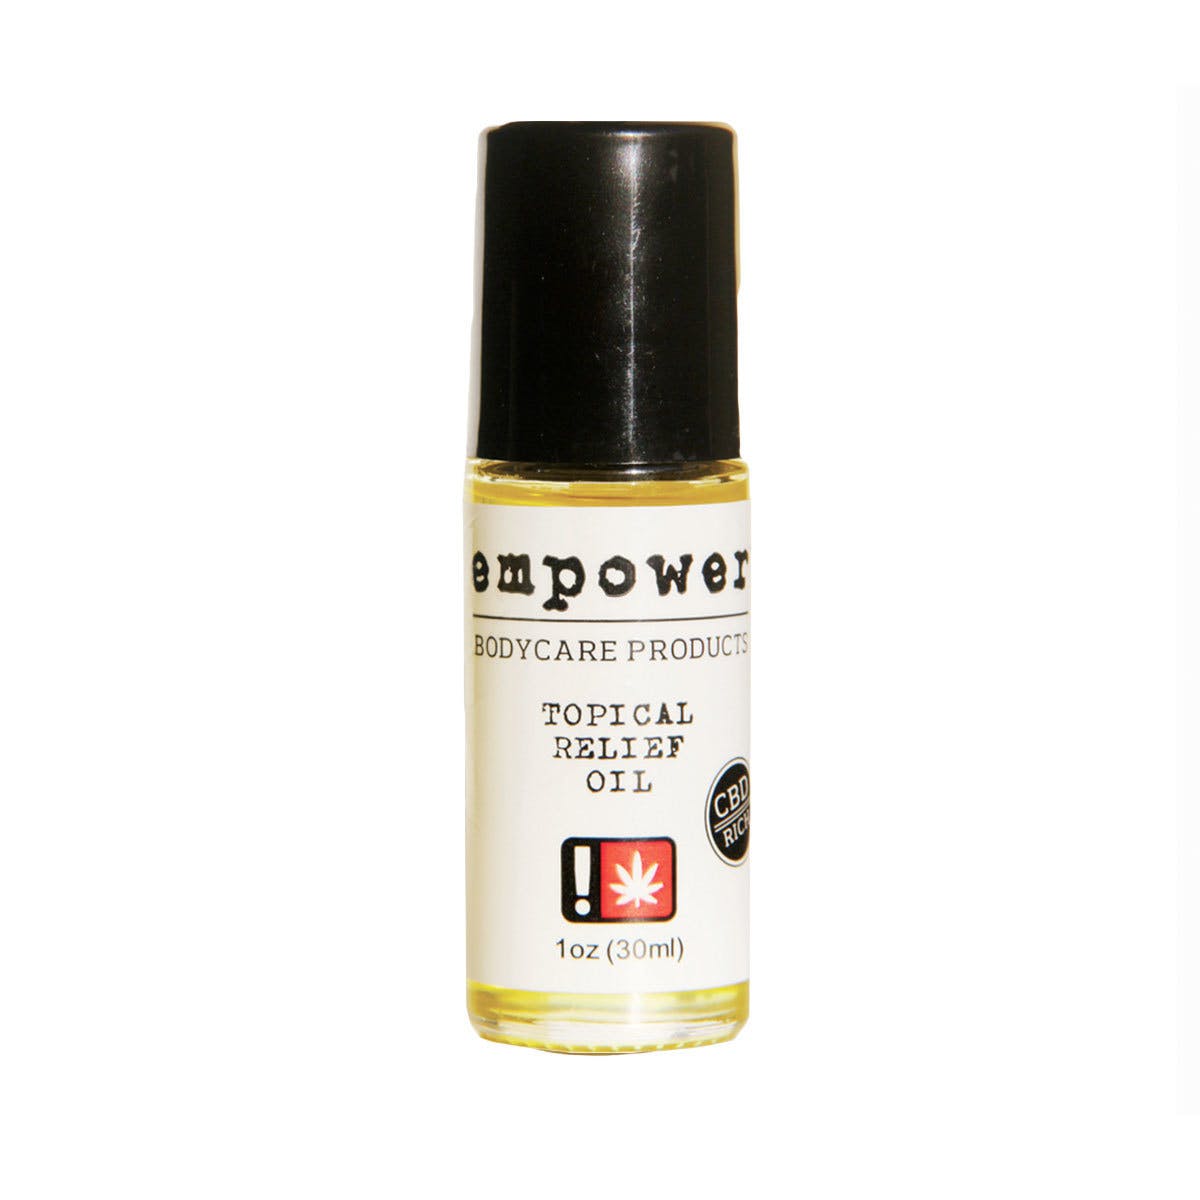 Empower® Topical Relief Oil - White Label 30ml